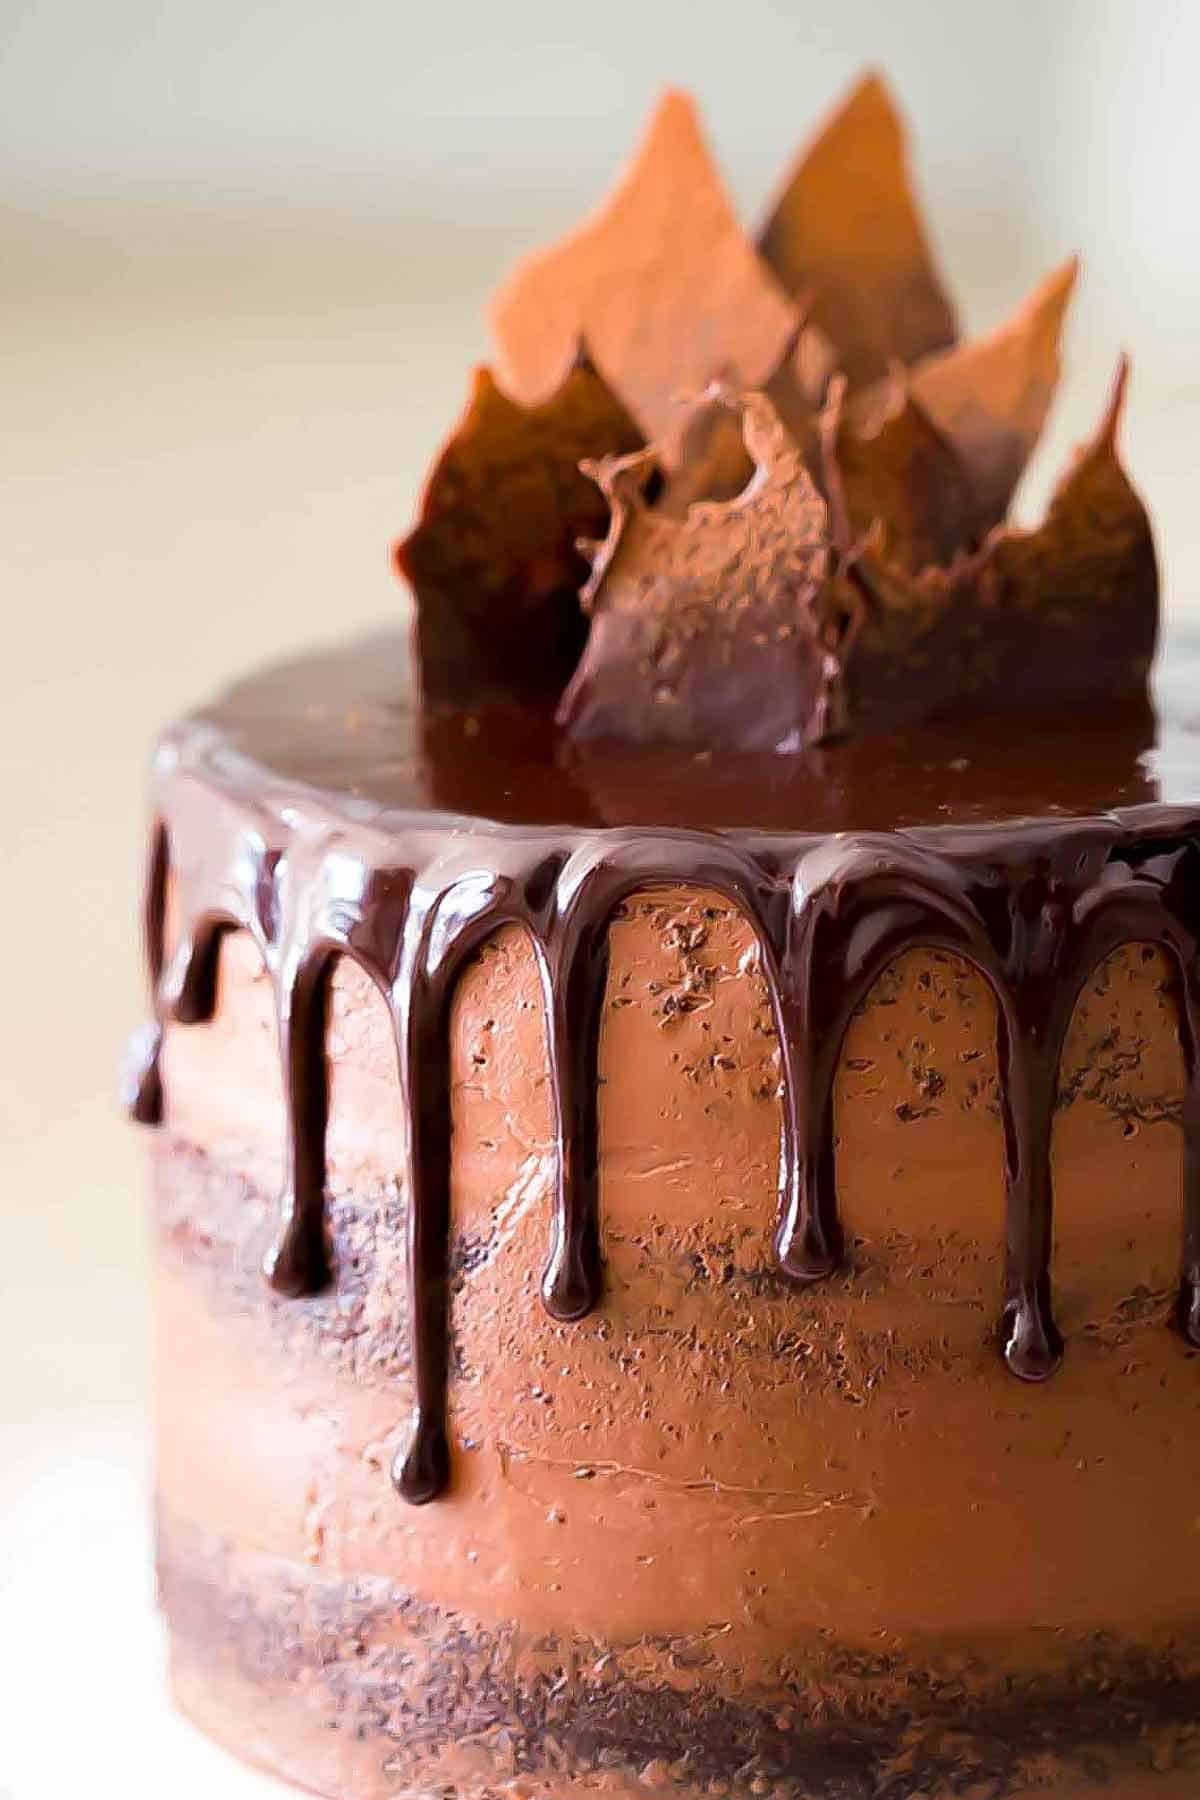 A cake with chocolate dripping over the top.